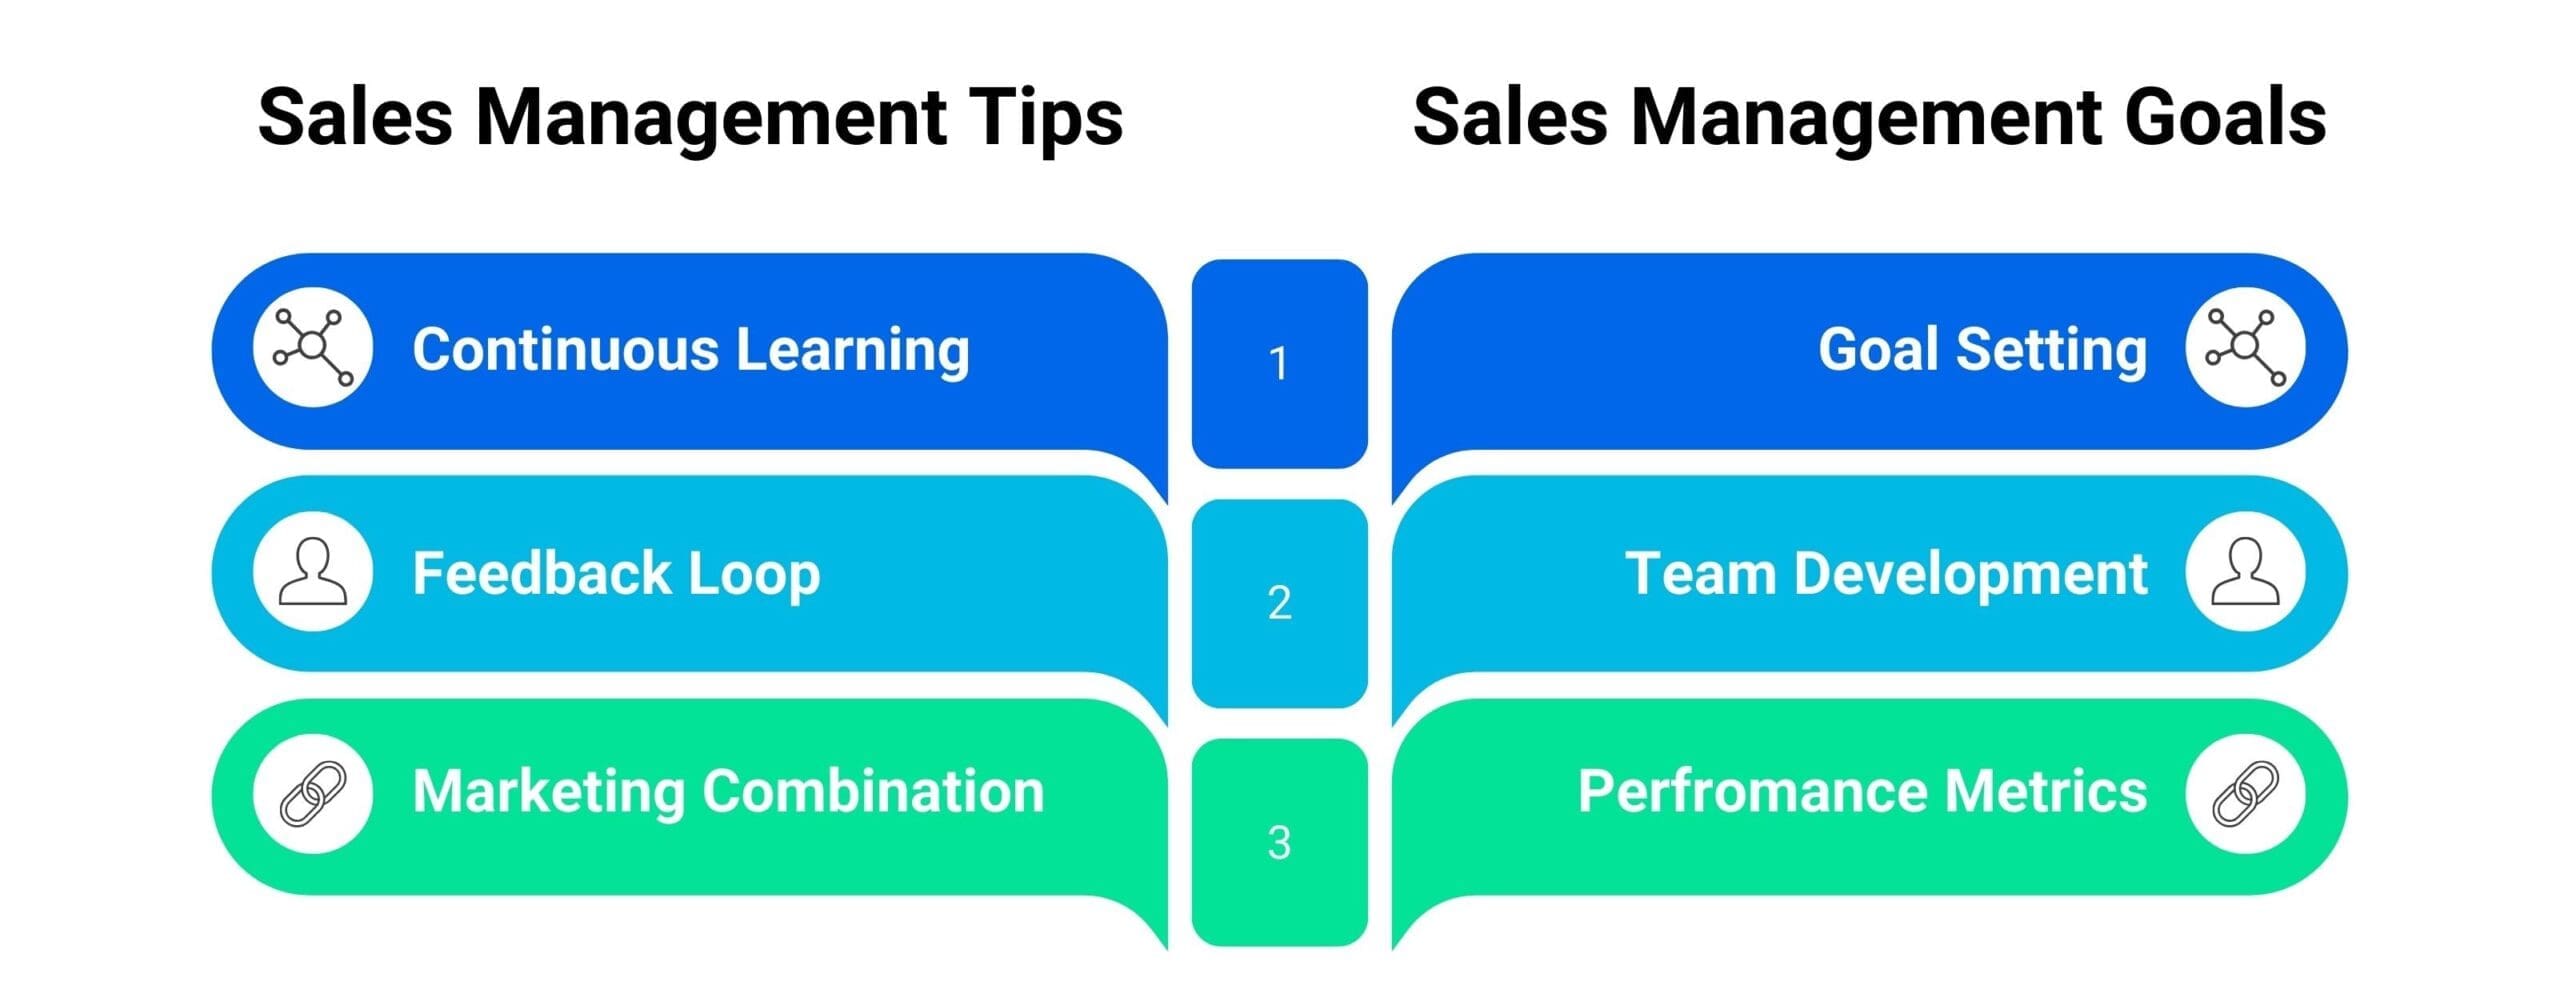 Sales Management Tips and Goals